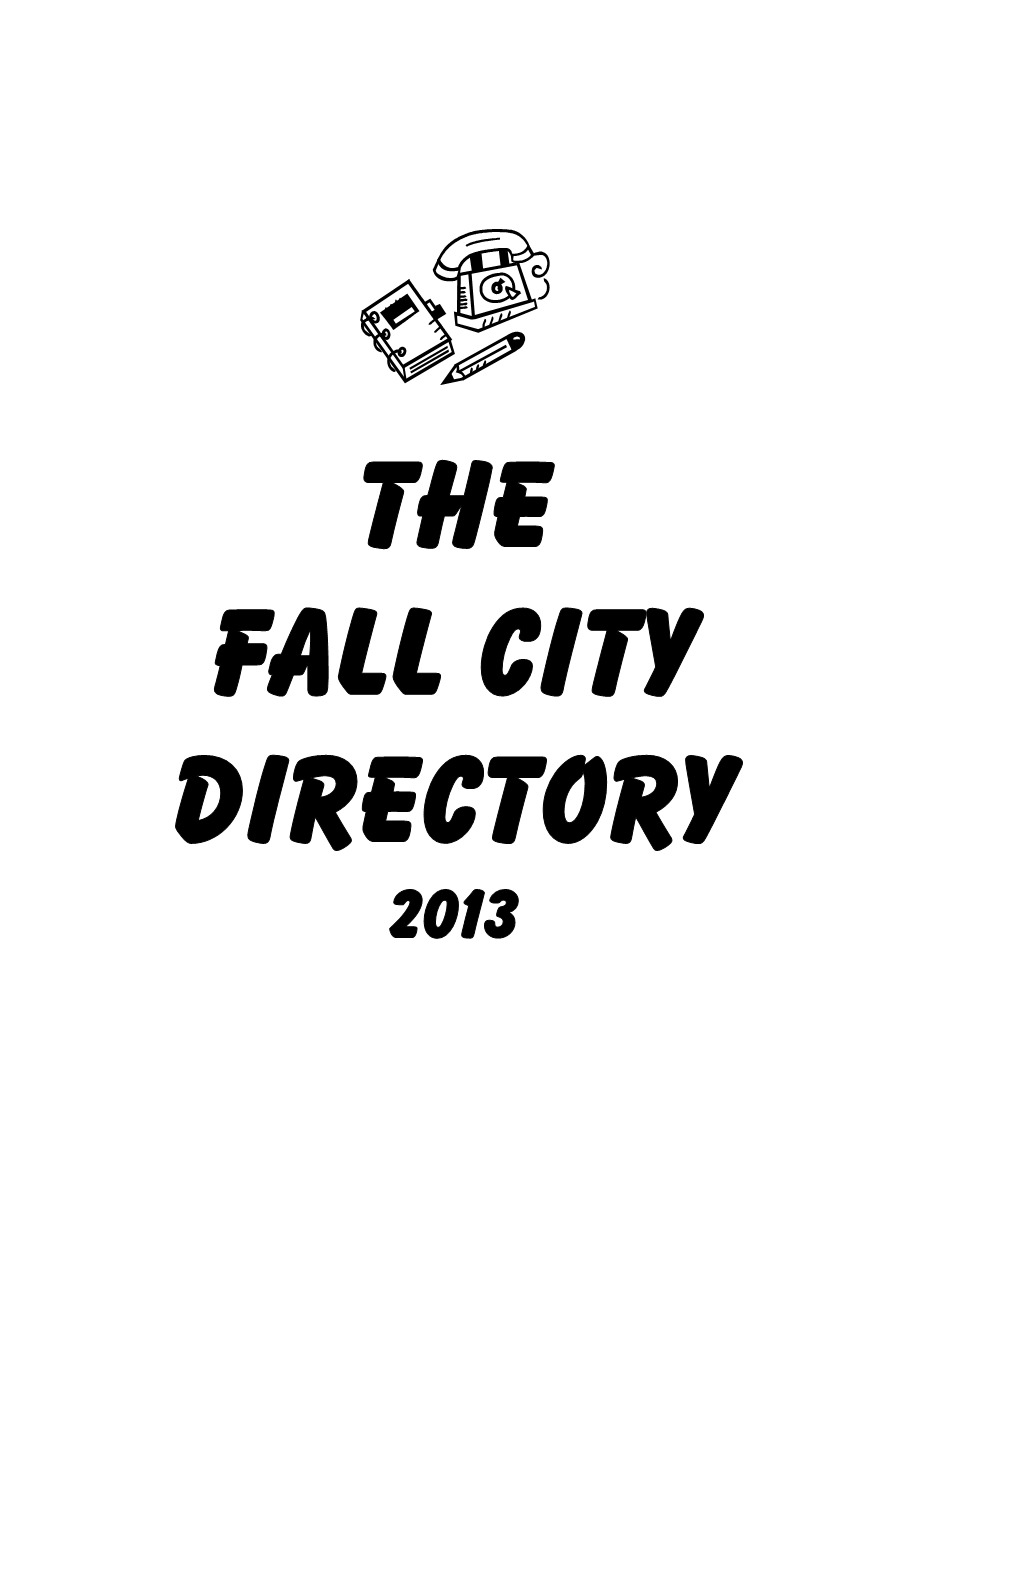 THE Fall City Directory 2013